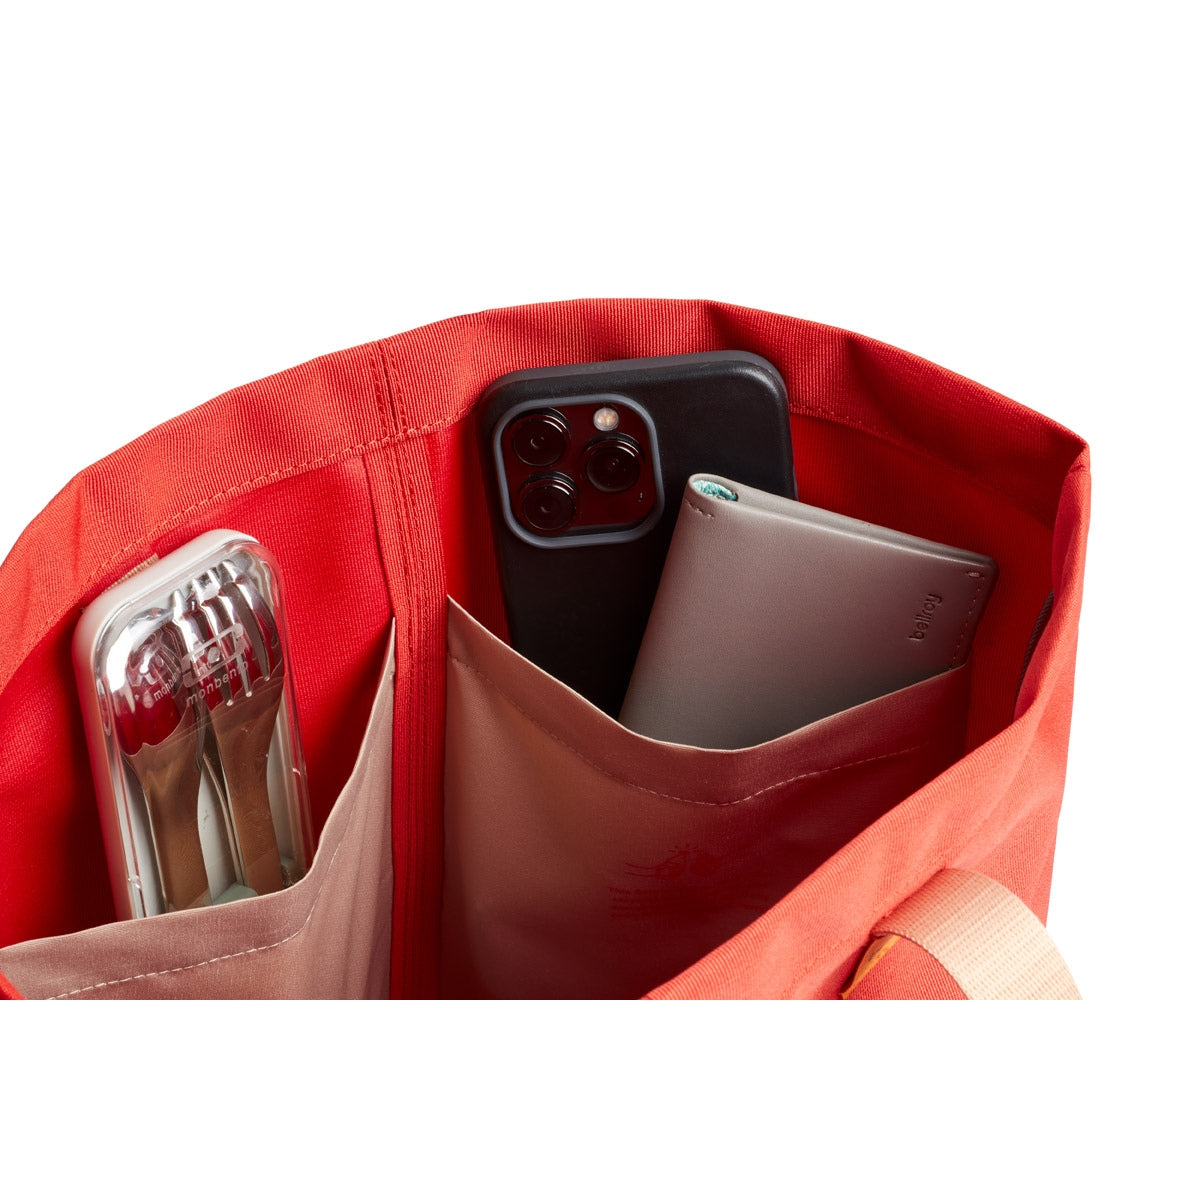 Bellroy City Tote in Hot Sauce